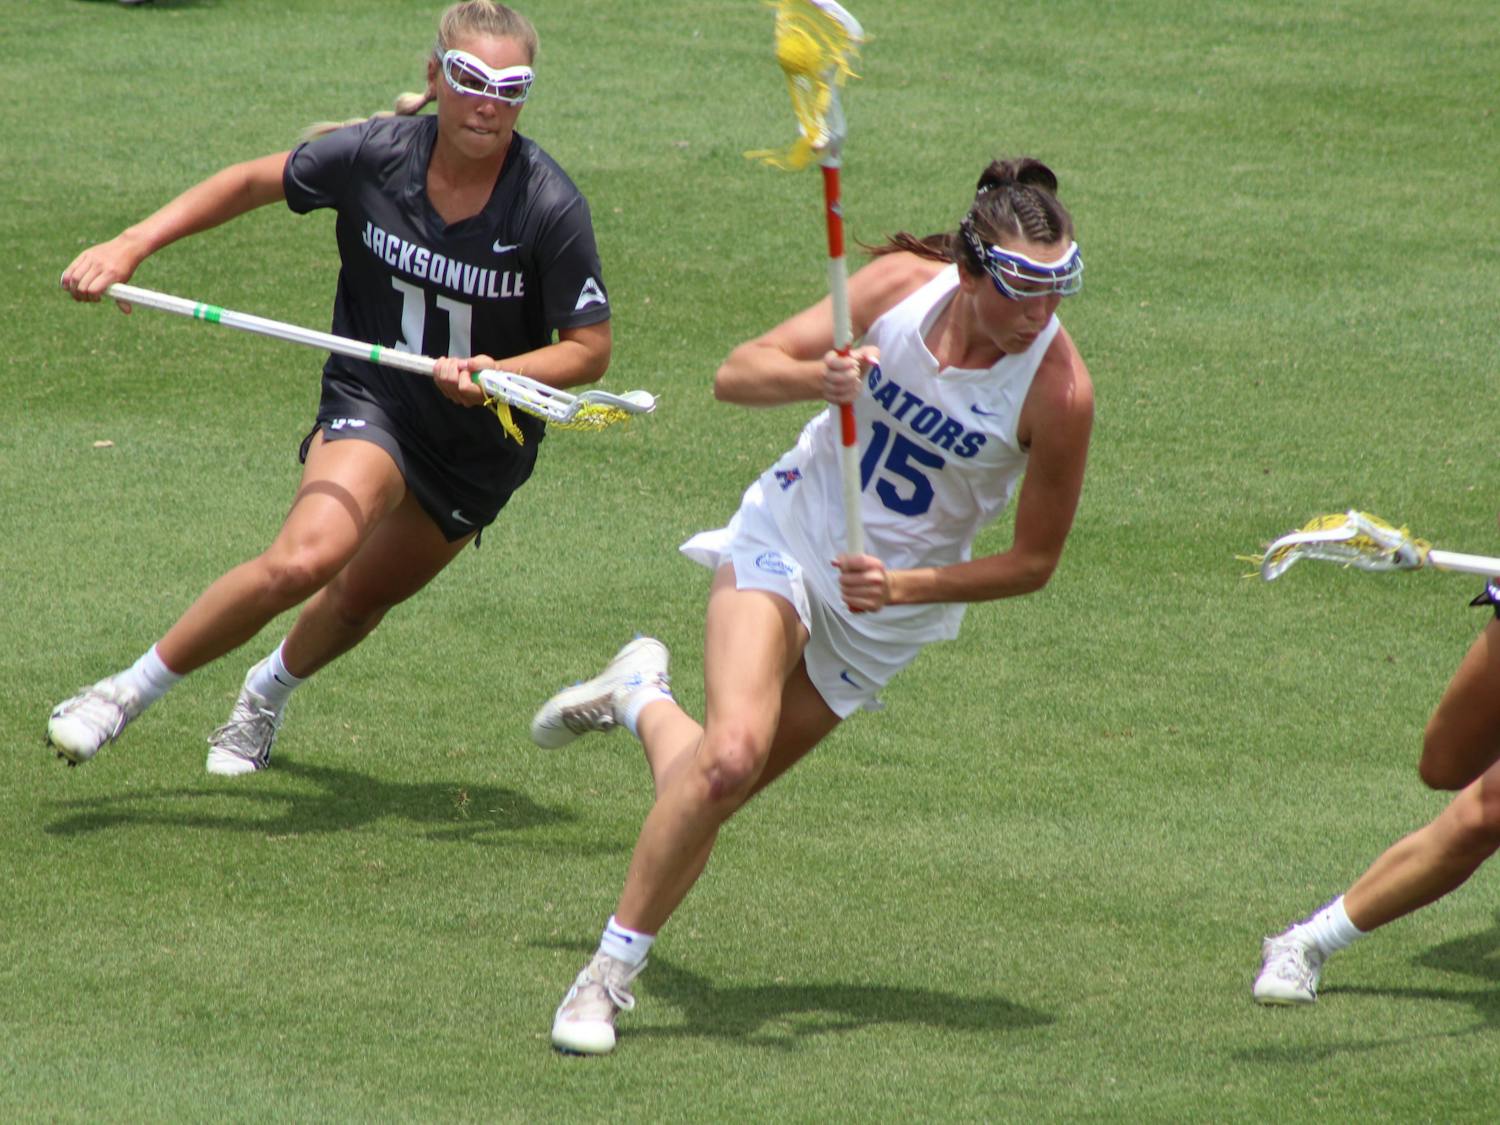 Attacker Grace Haus races down the field in Florida's 17-3 win over Jacksonville University.